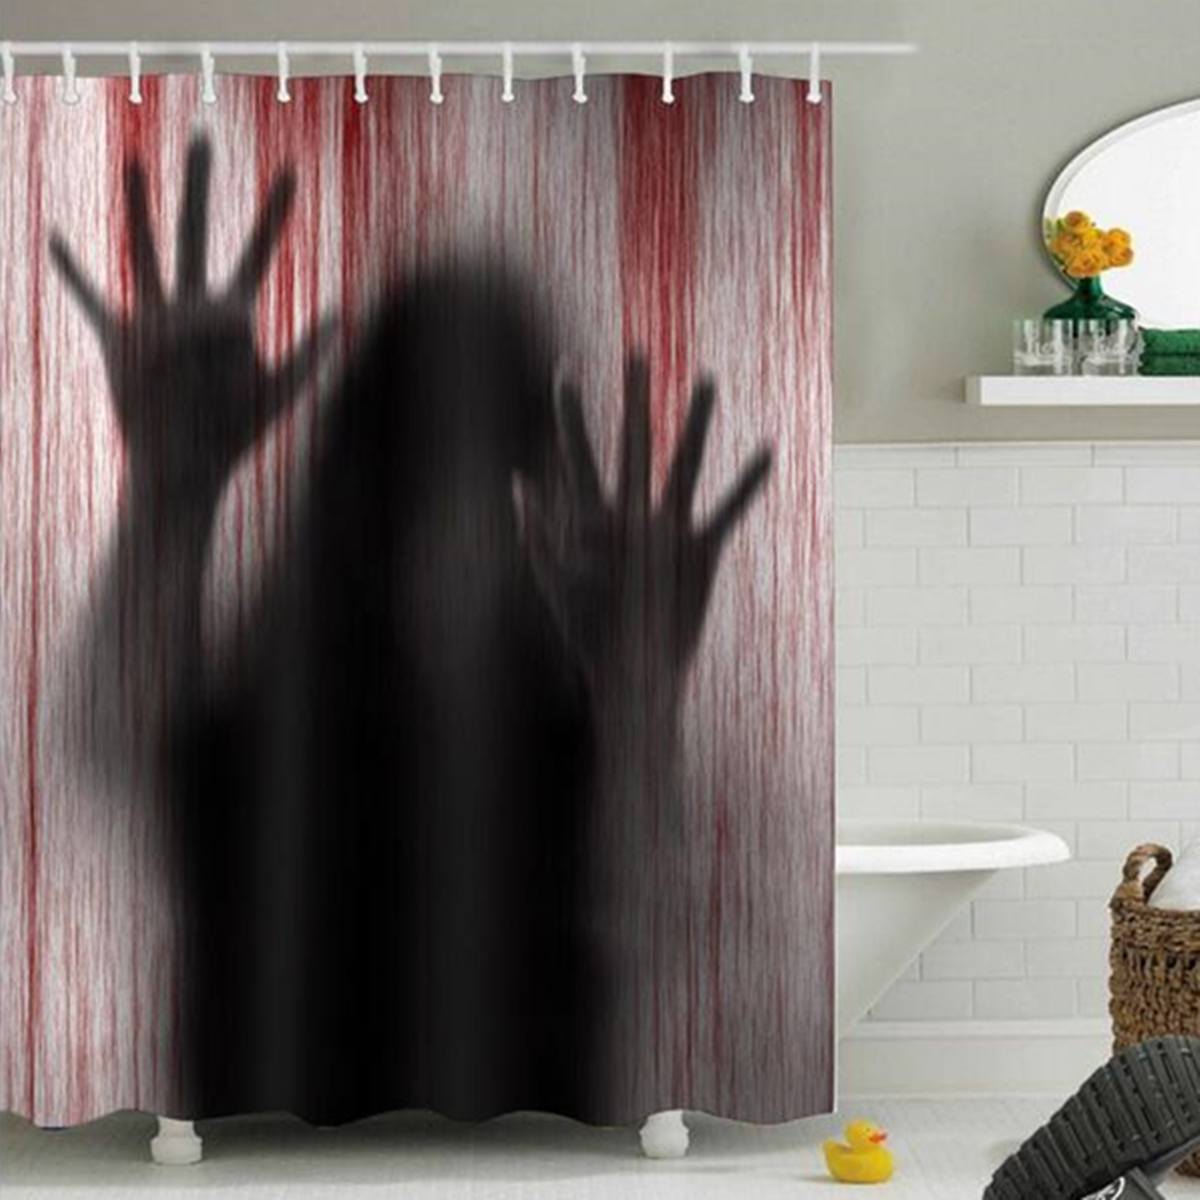 History Review On Shower, Psycho Shower Curtain